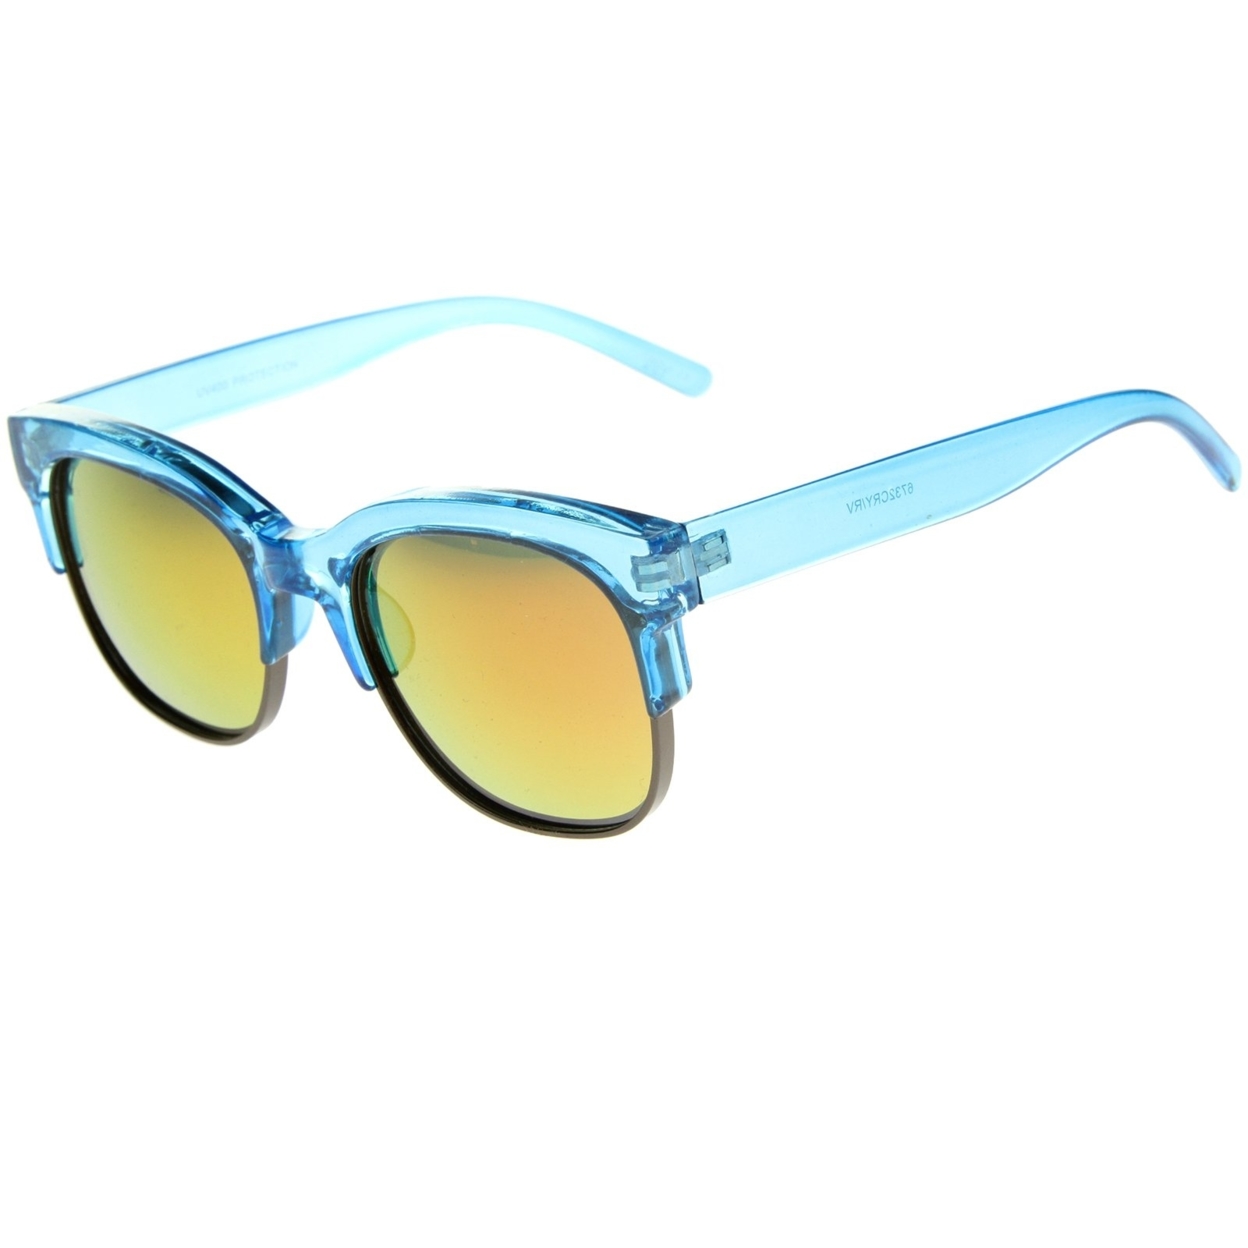 Bold Colorful Half-Frame Two-Toned Inset Mirrored Lens Horn Rimmed Sunglasses - Pink-Gunmetal / Blue Mirror